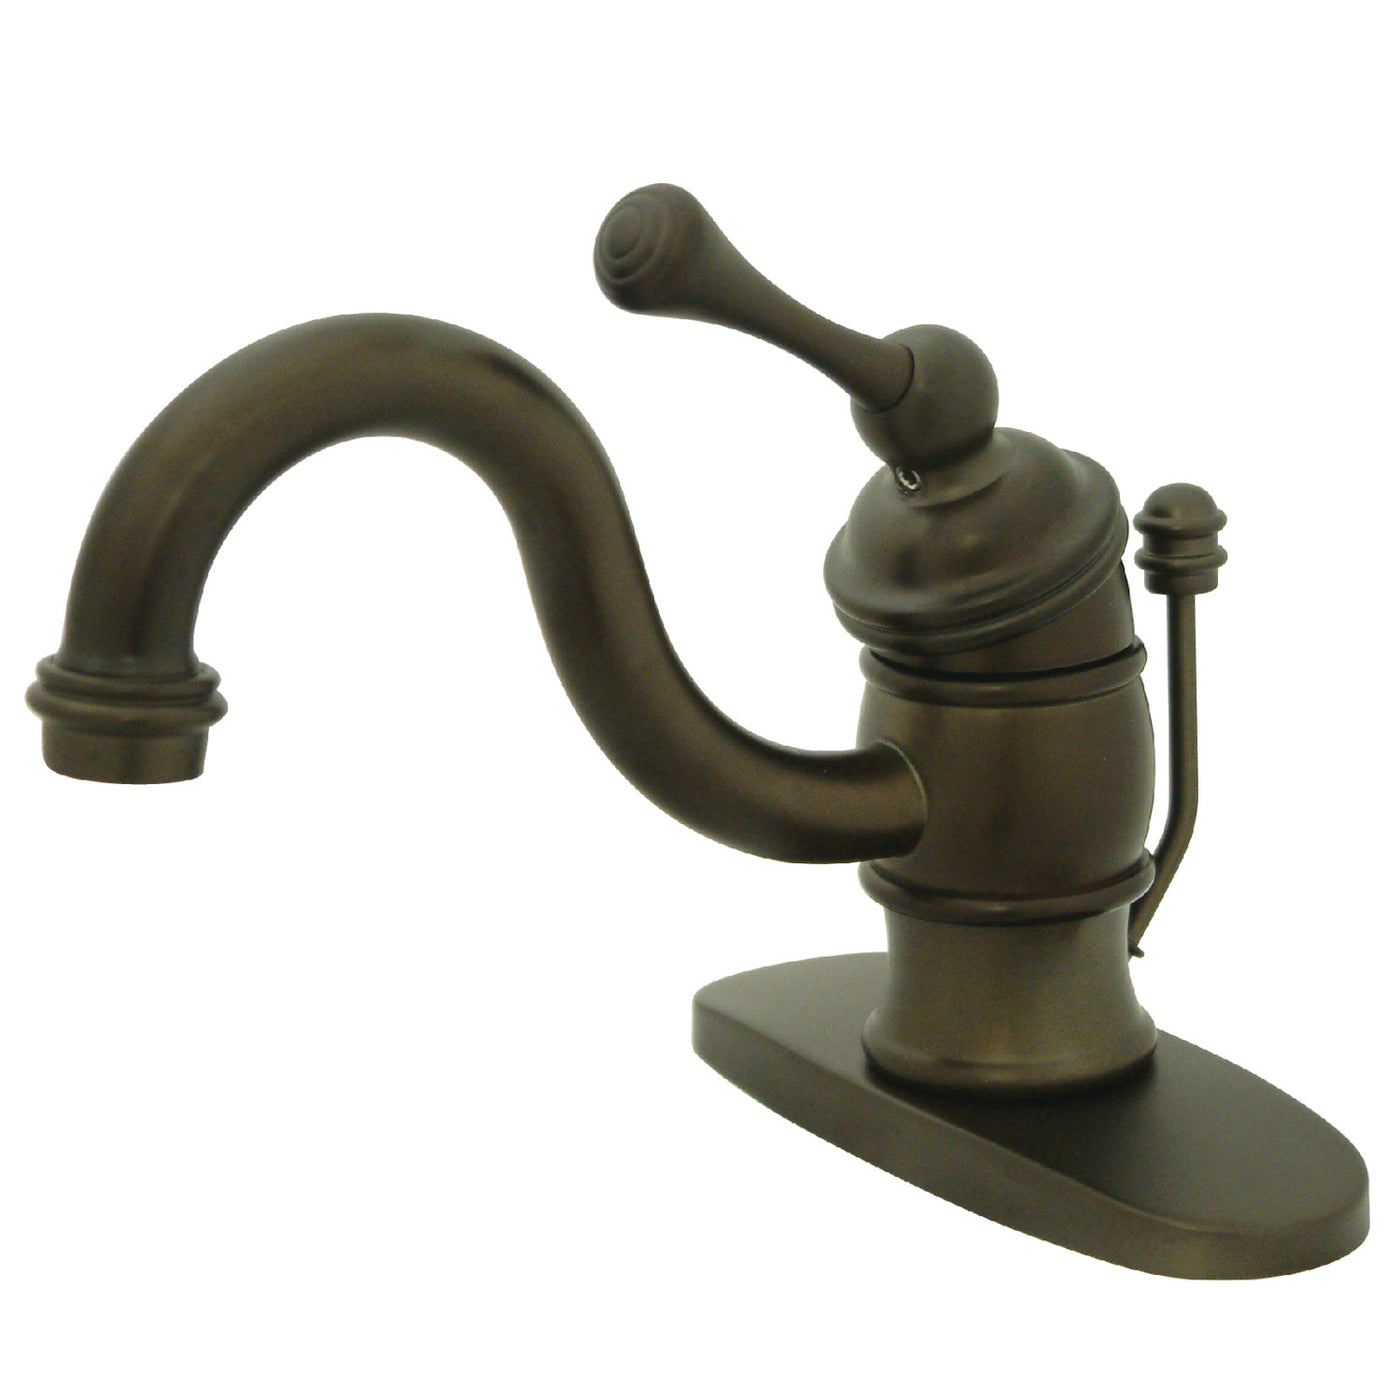 Elements of Design EB3405BL Single-Handle Bathroom Faucet with Pop-Up Drain, Oil Rubbed Bronze